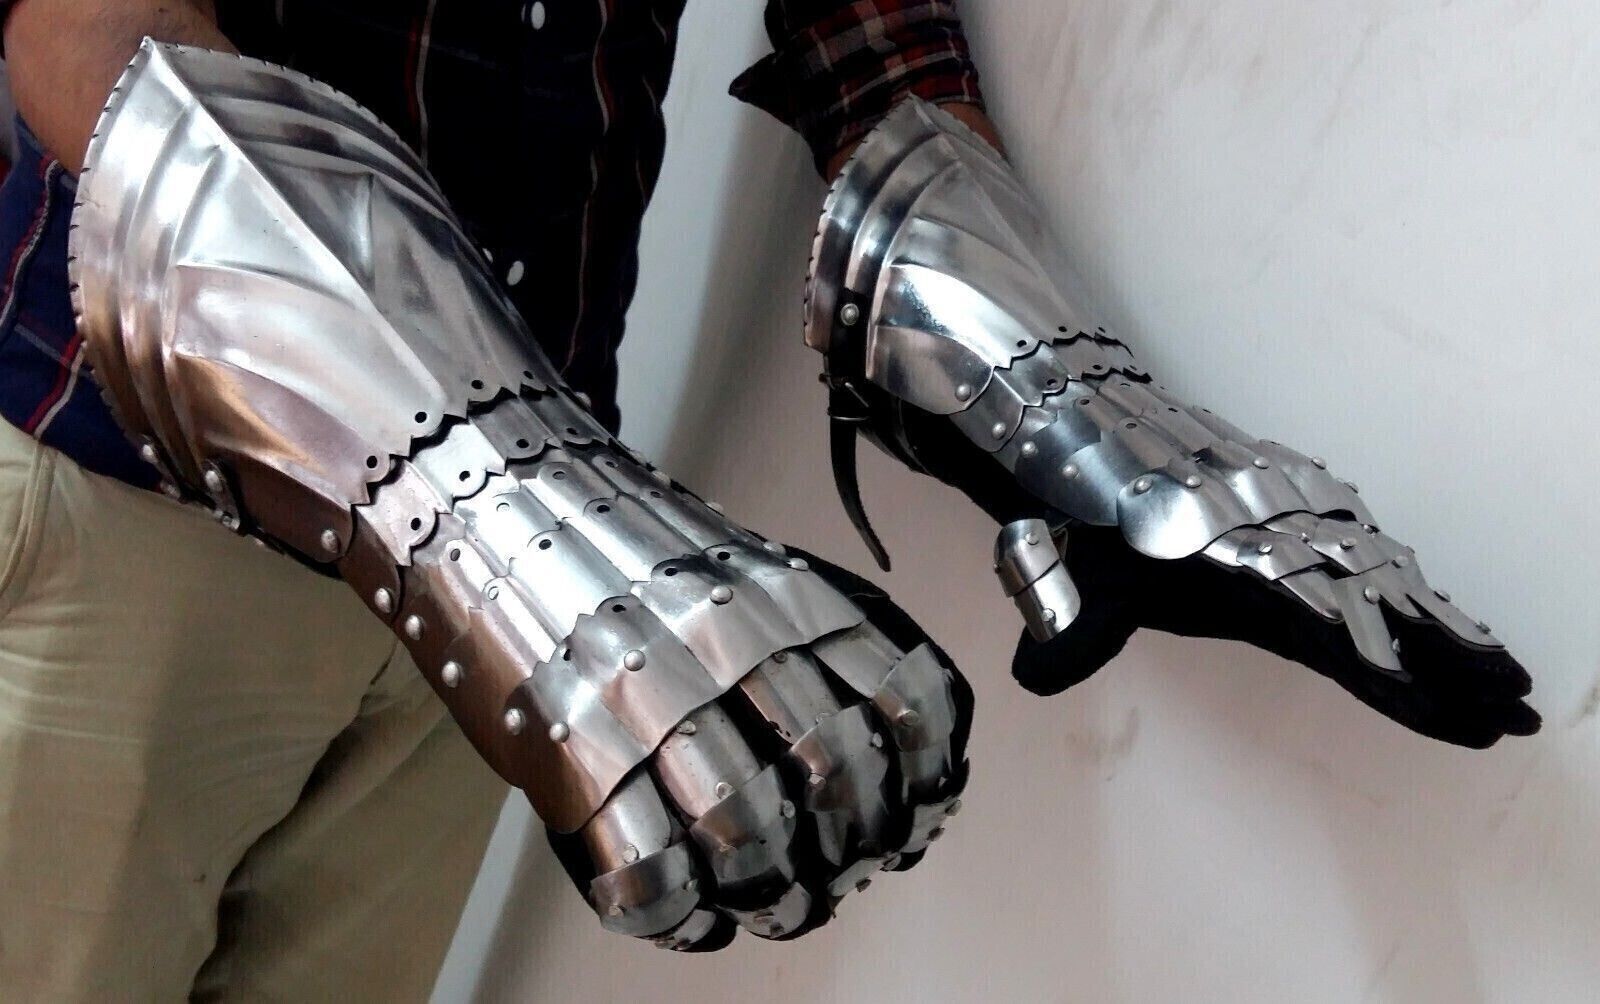 MEDIEVAL WARRIOR METAL GOTHIC KNIGHT STYLE GAUNTLETS FUNCTIONAL ARMOR GLOVES